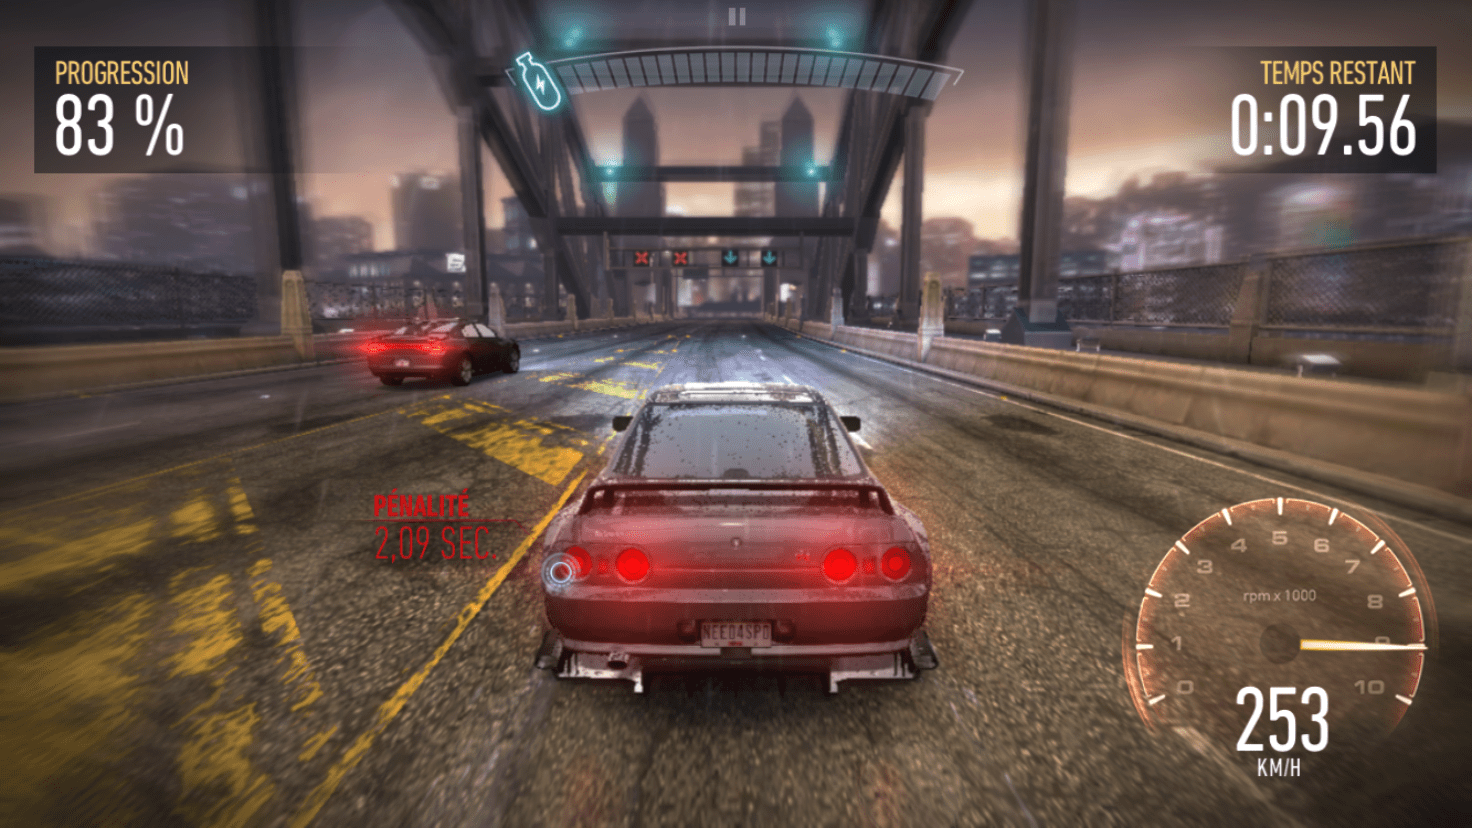 Nfs 2 mobile. Игра NFS no limits. Need for Speed no limits 2015. Need for Speed no limits обои. Need for Speed no limits на андроид.